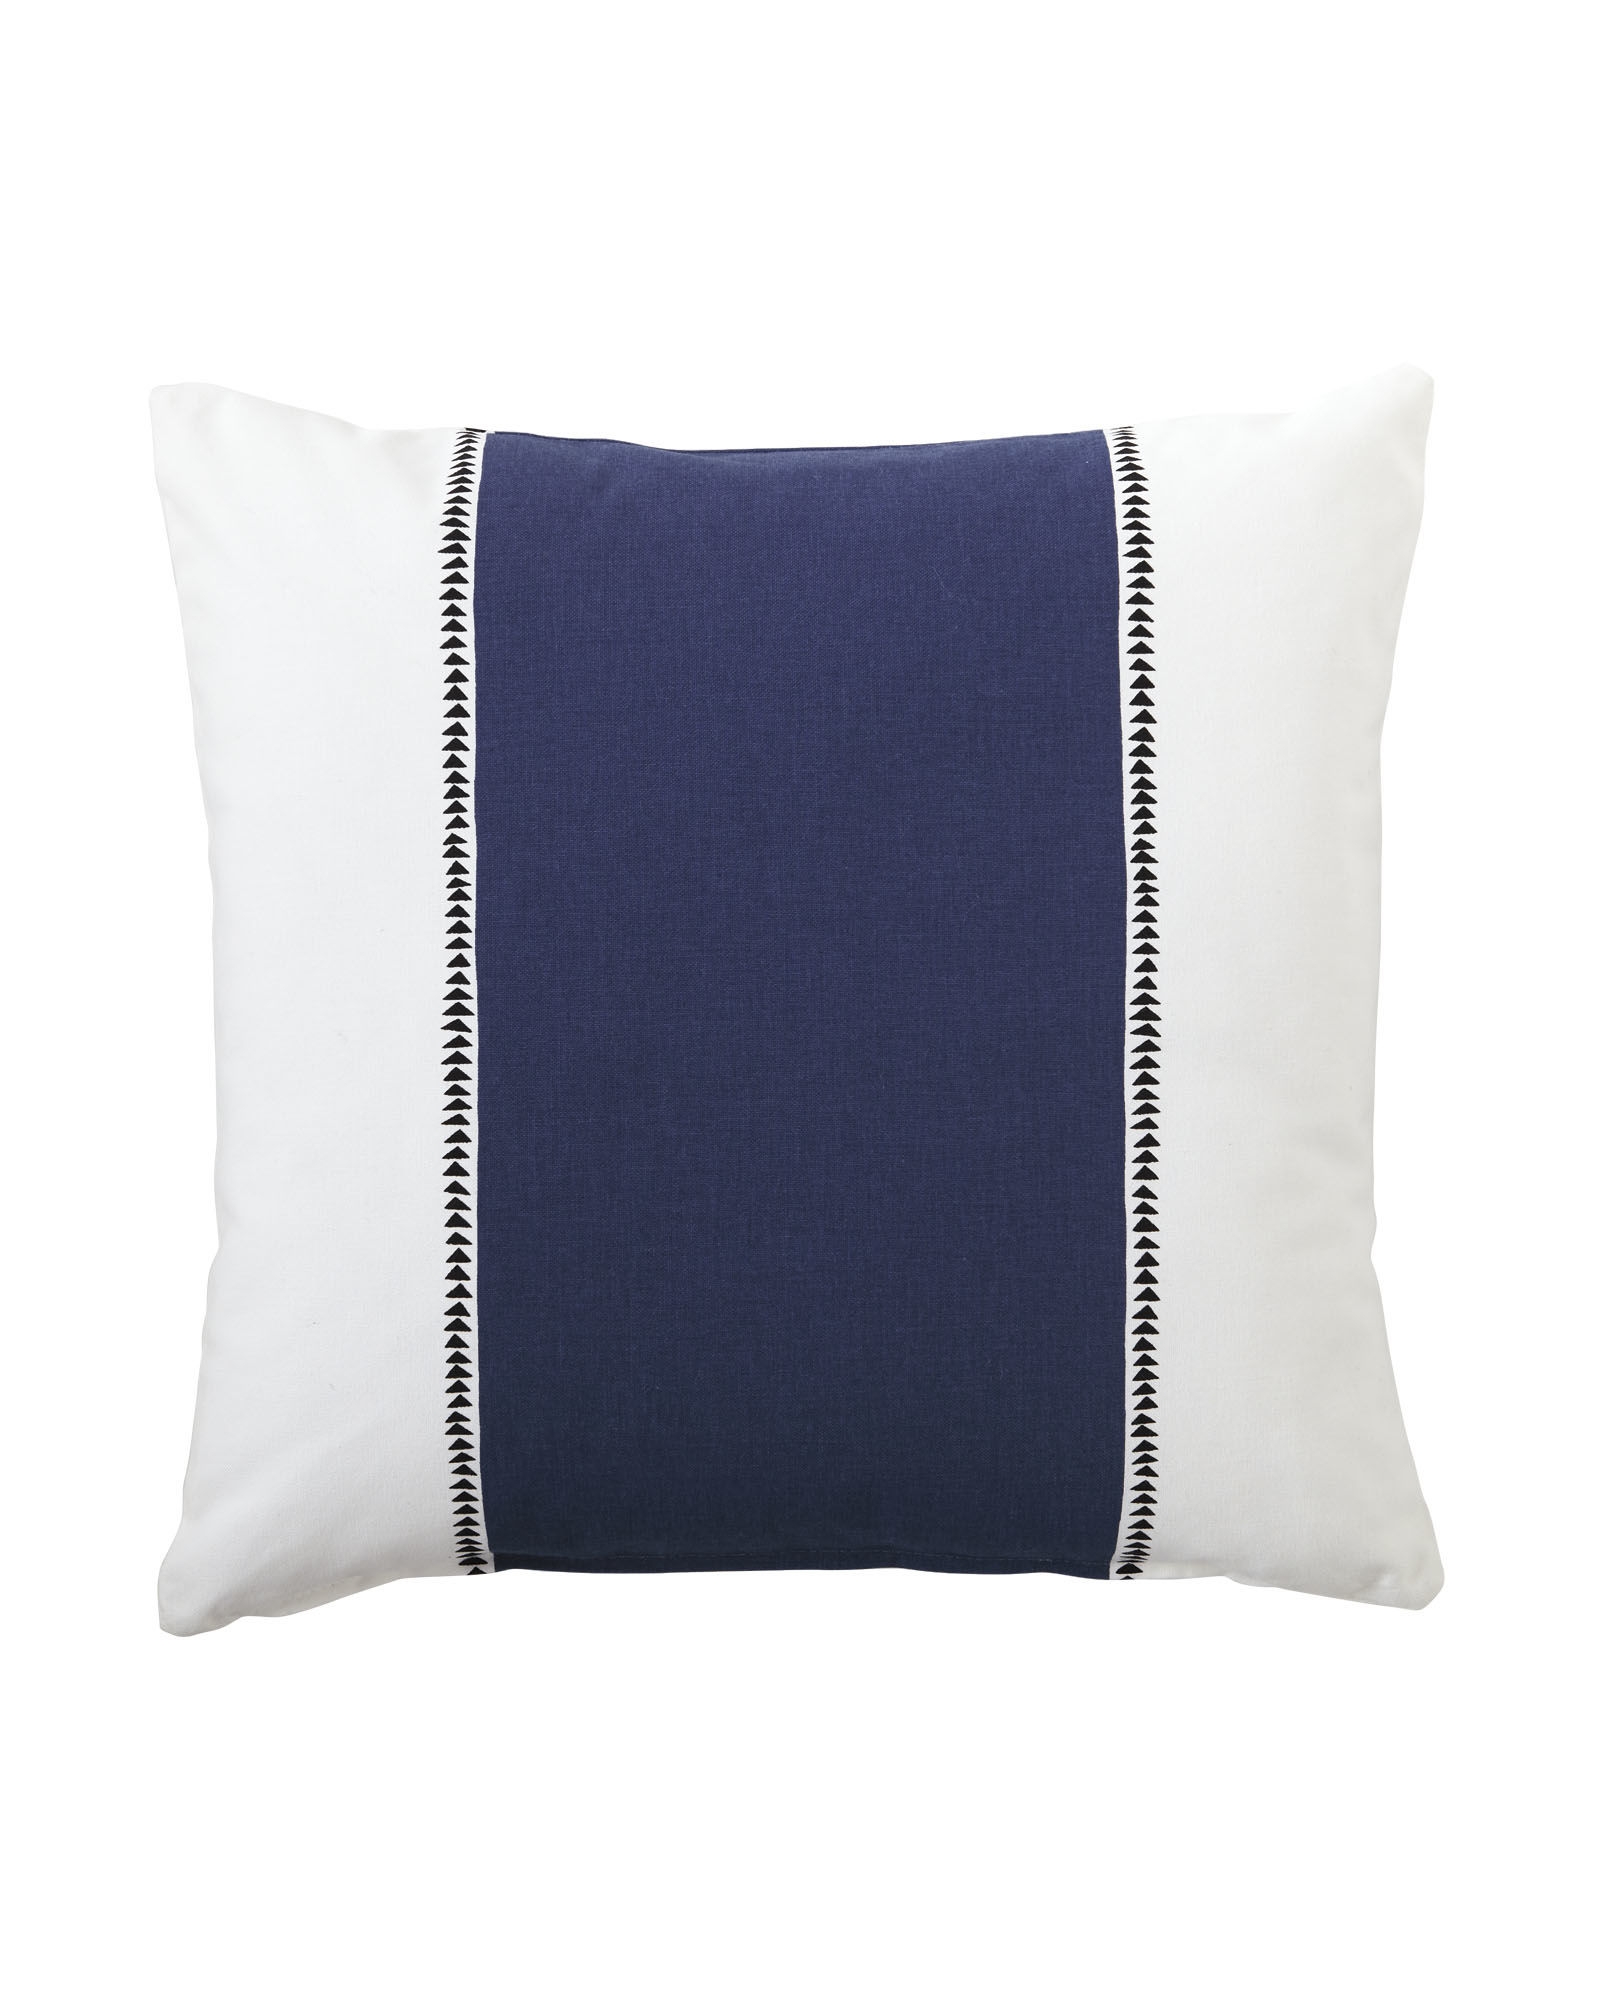 Racing Stripe Pillow Cover Navy, 20"x20"- Insert Sold Separately - Image 1